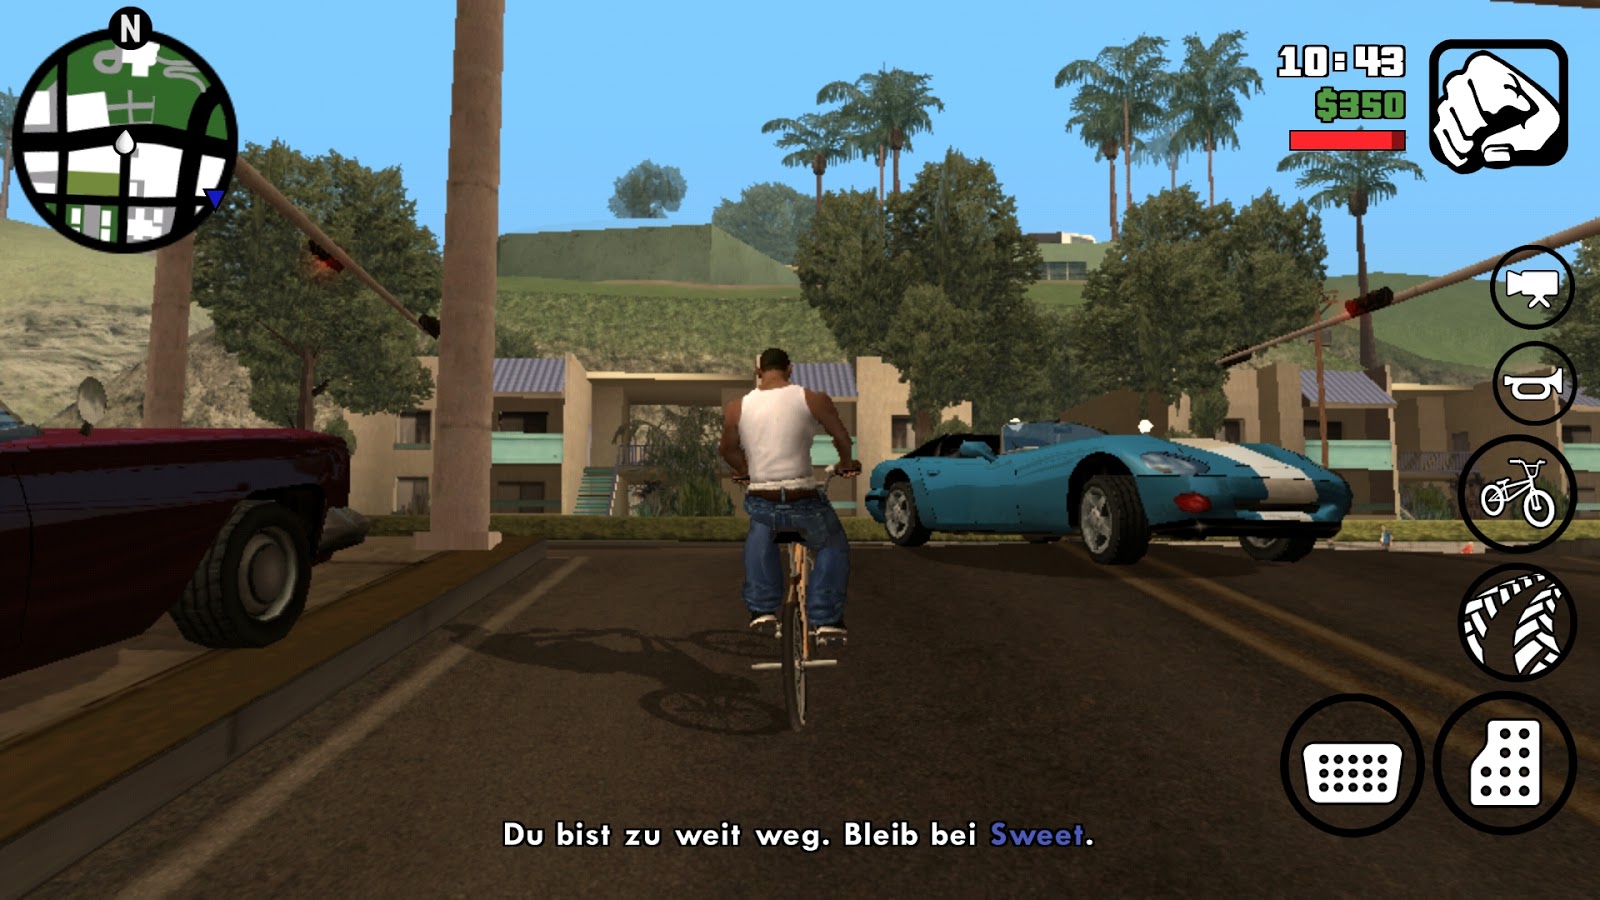 Gta san andreas apk + data free download for android highly compressed